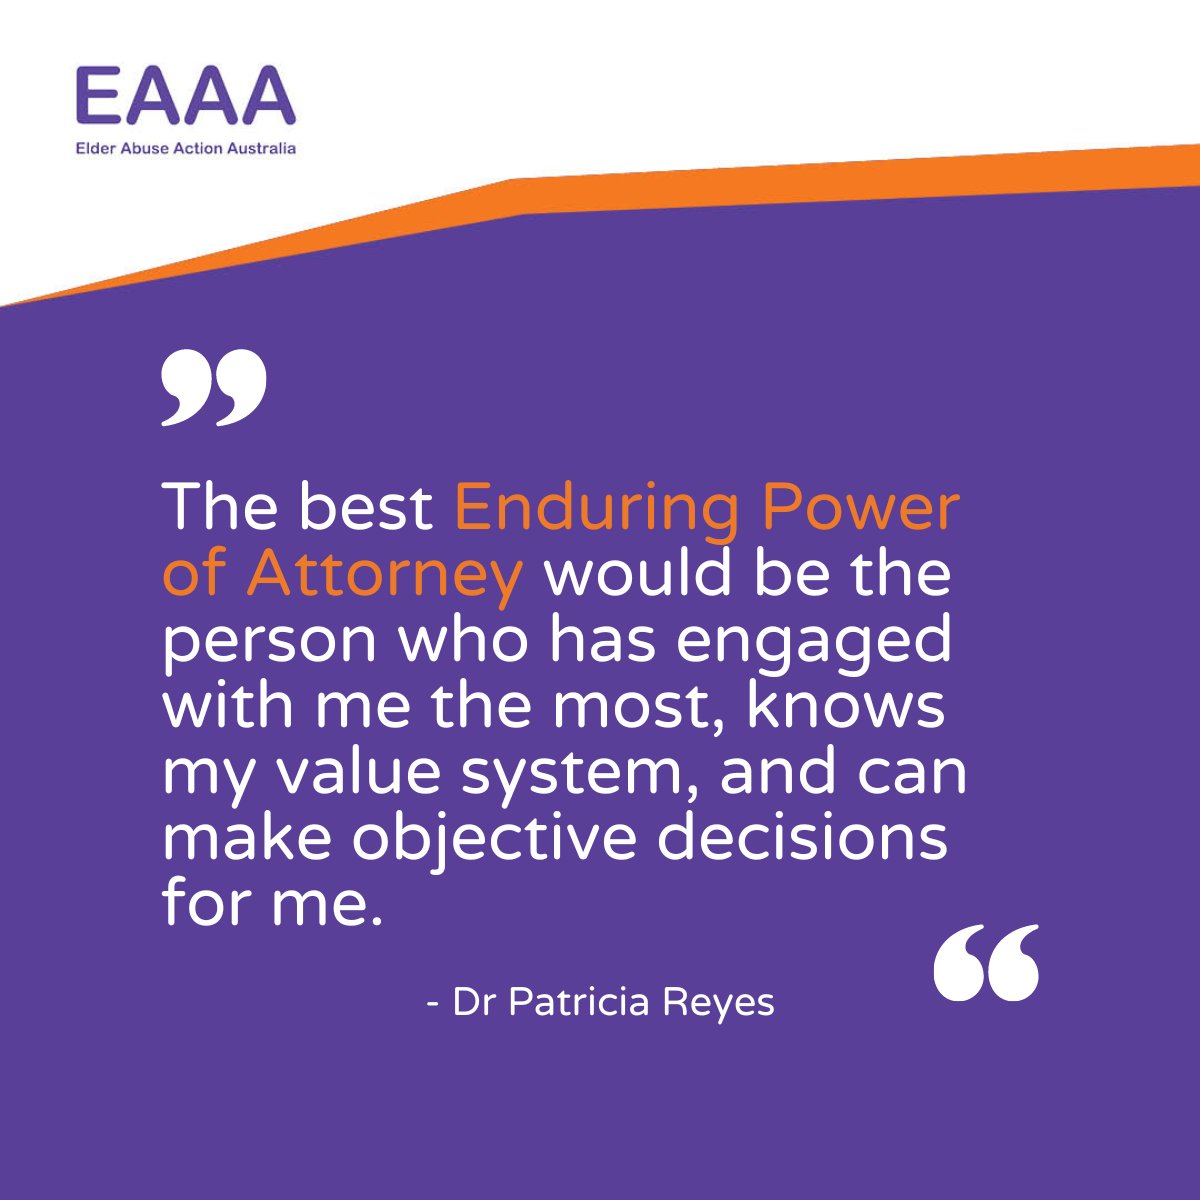 Choosing an #EnduringPowerOfAttorney can be challenging. Dr Patricia Reyes, Director of Medical Services at the @weareuniting War Memorial Hospital, Waverley and Consultant Geriatrician at @SVHSydney, shared her thoughts on choosing the best EPOA. #ElderAbuse #HumanRights